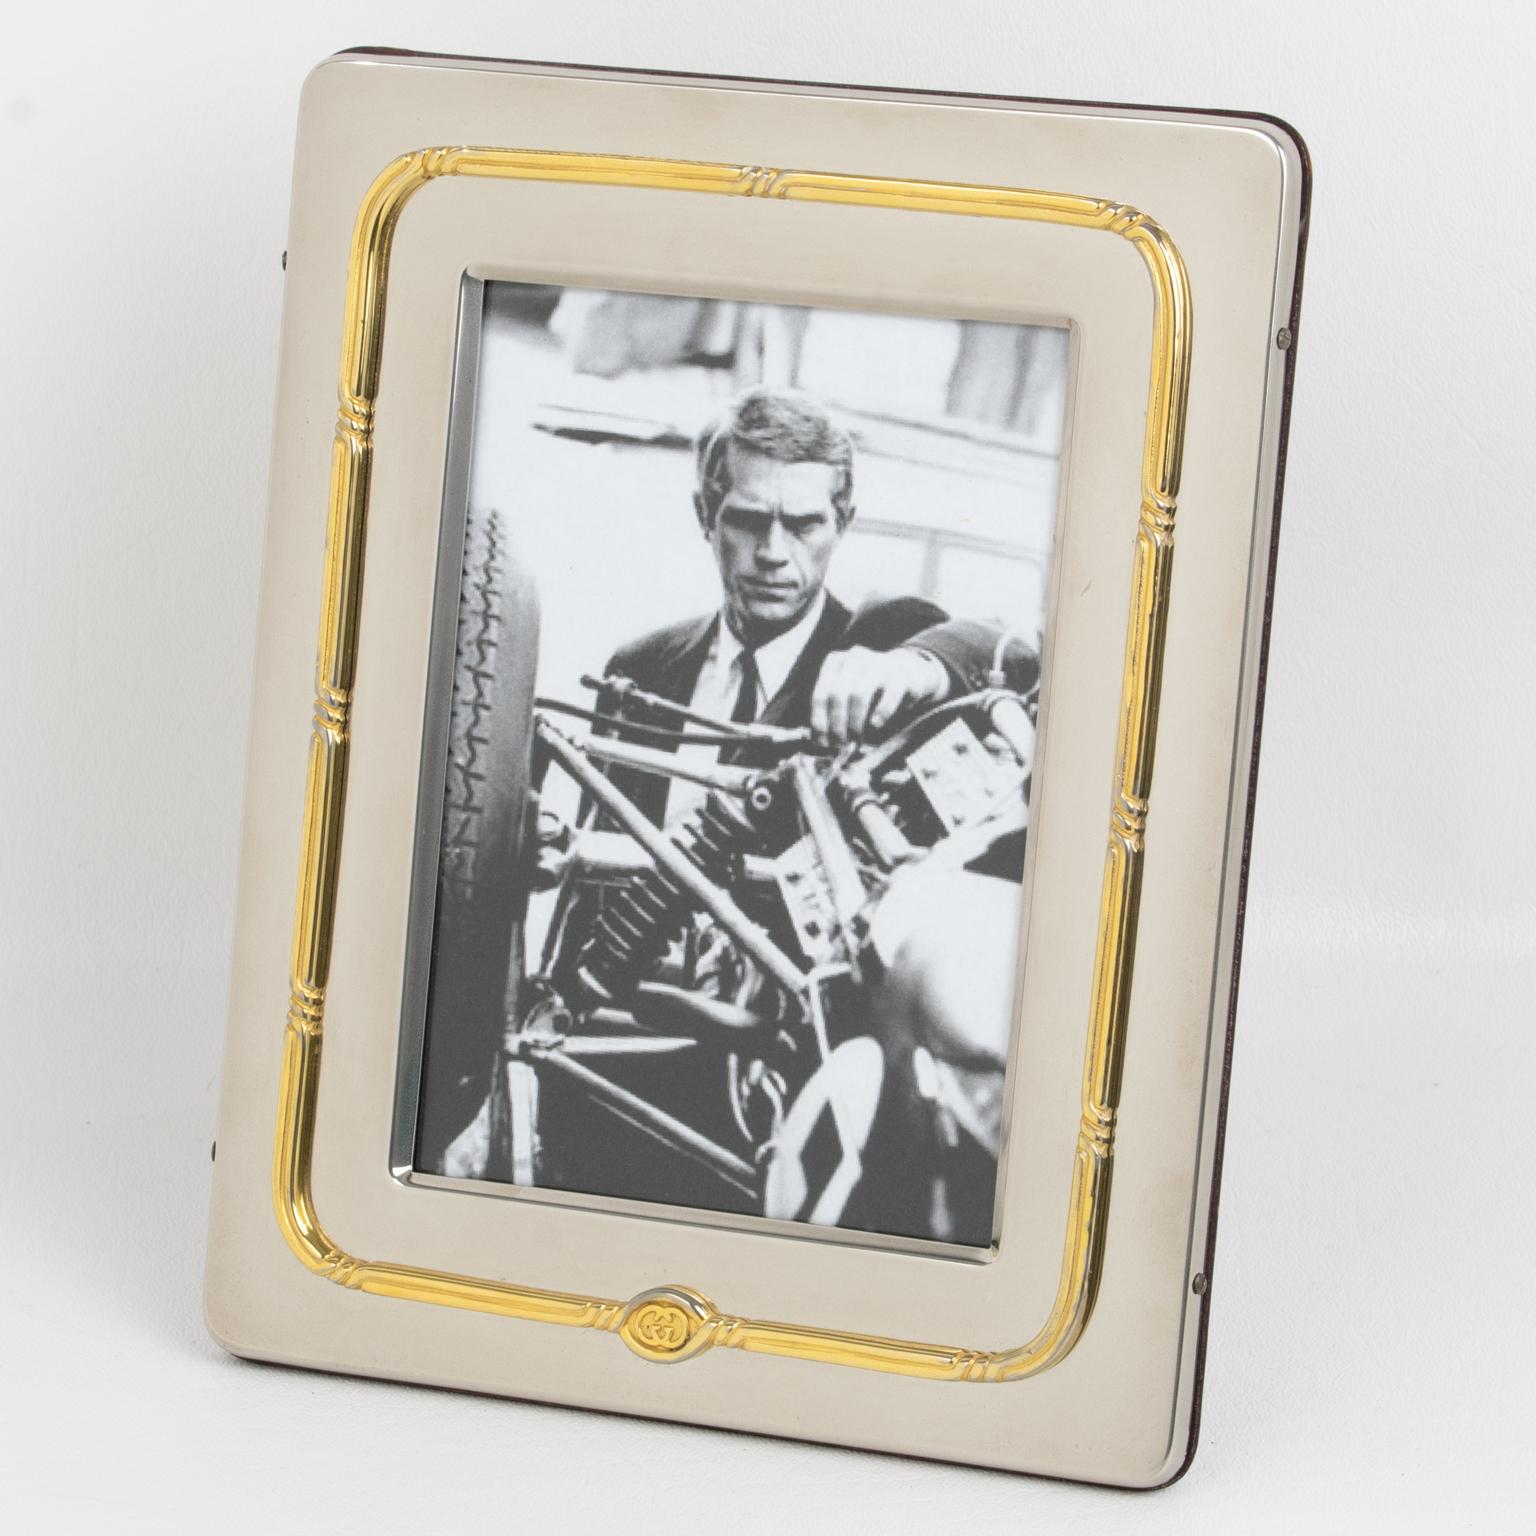 Italian designer Gucci crafted this ultra-chic picture photo frame in the 1980s. The rectangular shape boasts rounded corners in silver plate metal with gold plate accents in the carved design around it. The GG brand logo is visible on the front and